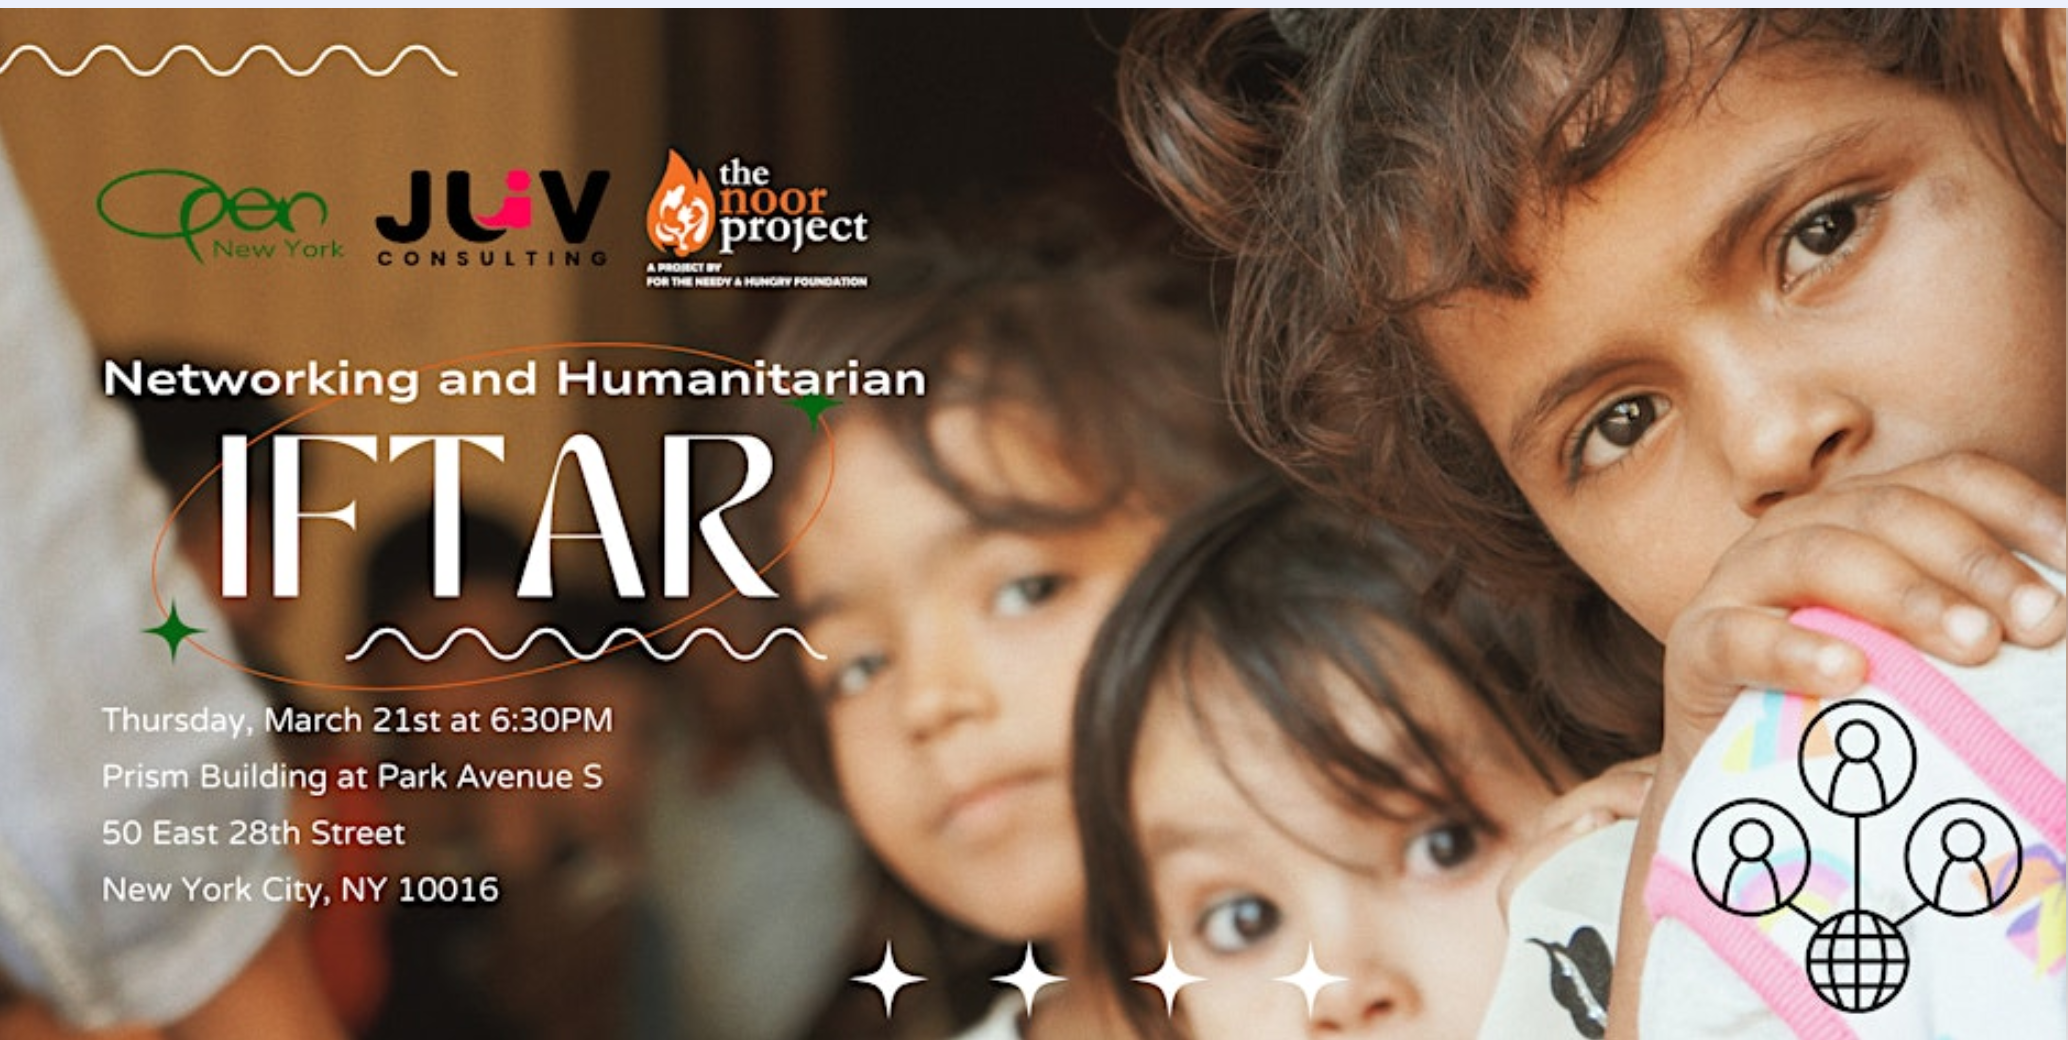 OPEN NY & The Noor Project - Networking and Humanitarian Iftar